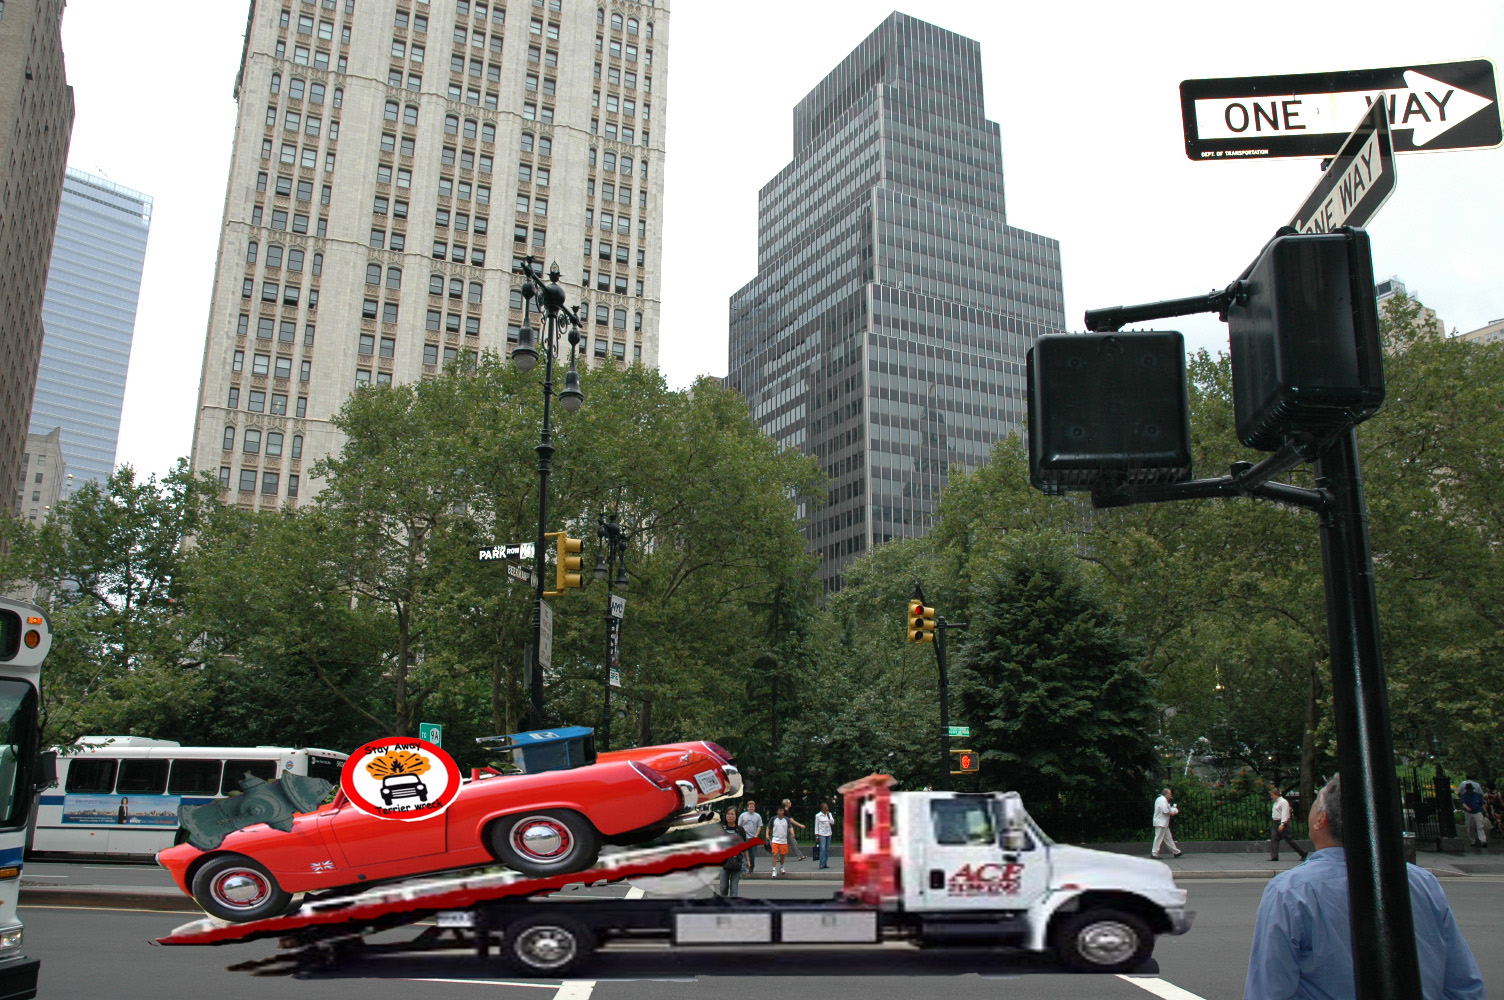 [Tow+Truck+in+NYC.jpg]